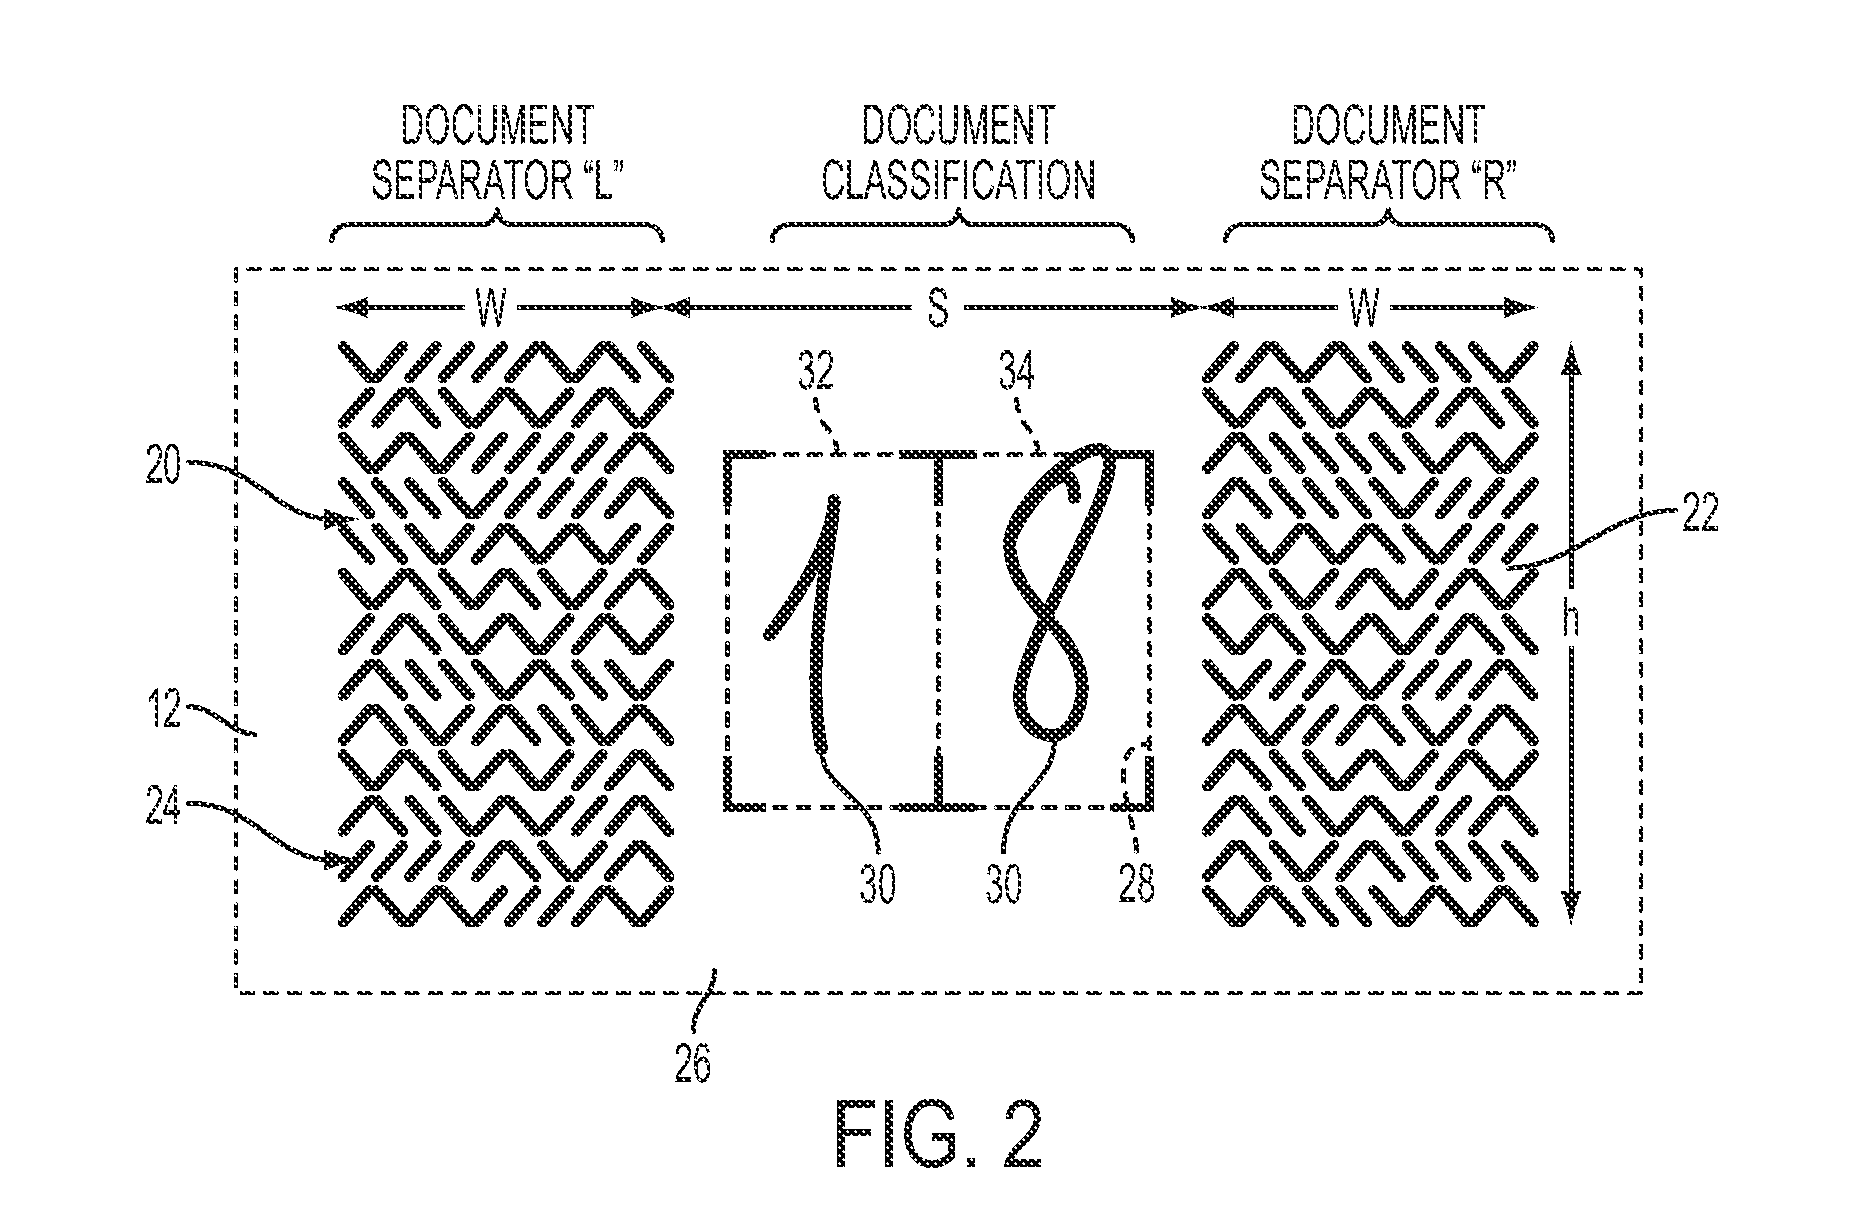 Method for one-step document categorization and separation